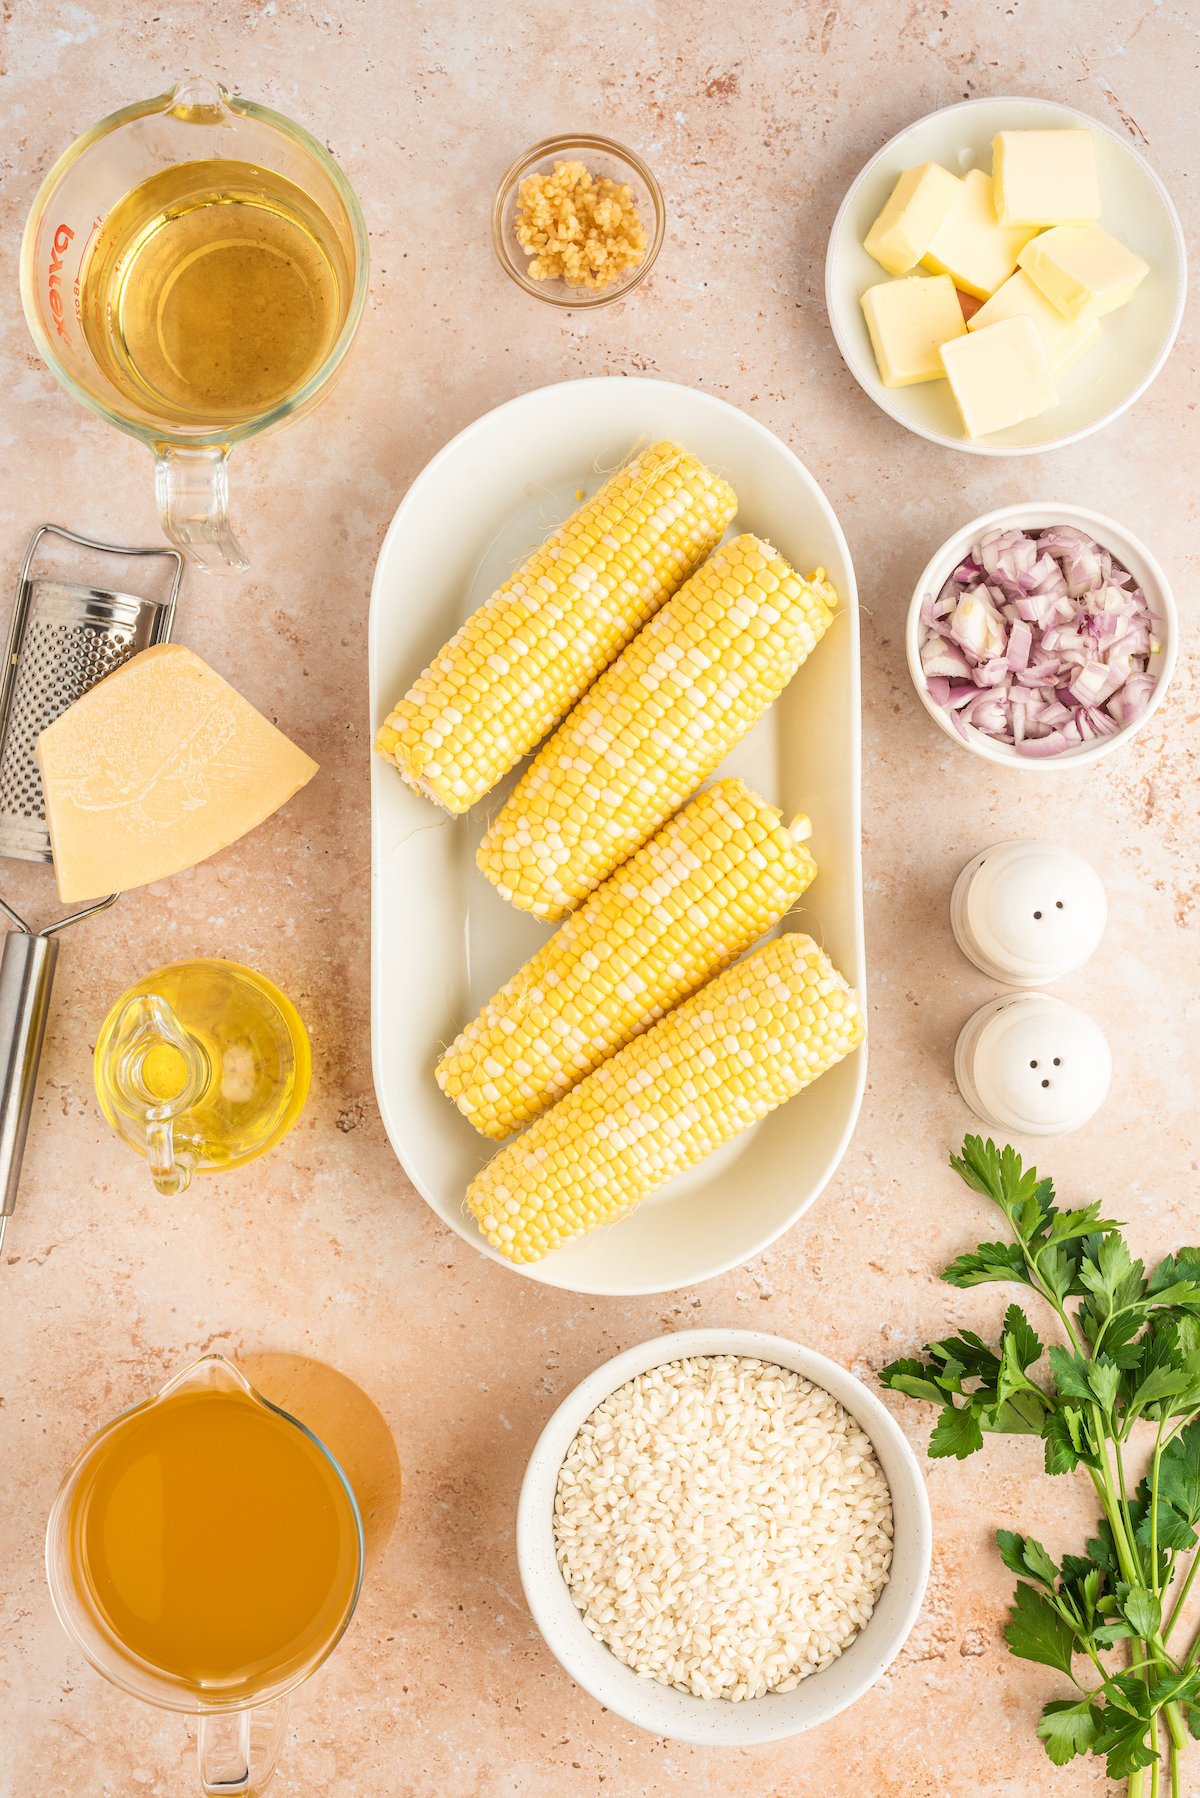 Ingredients for sweet corn risotto.